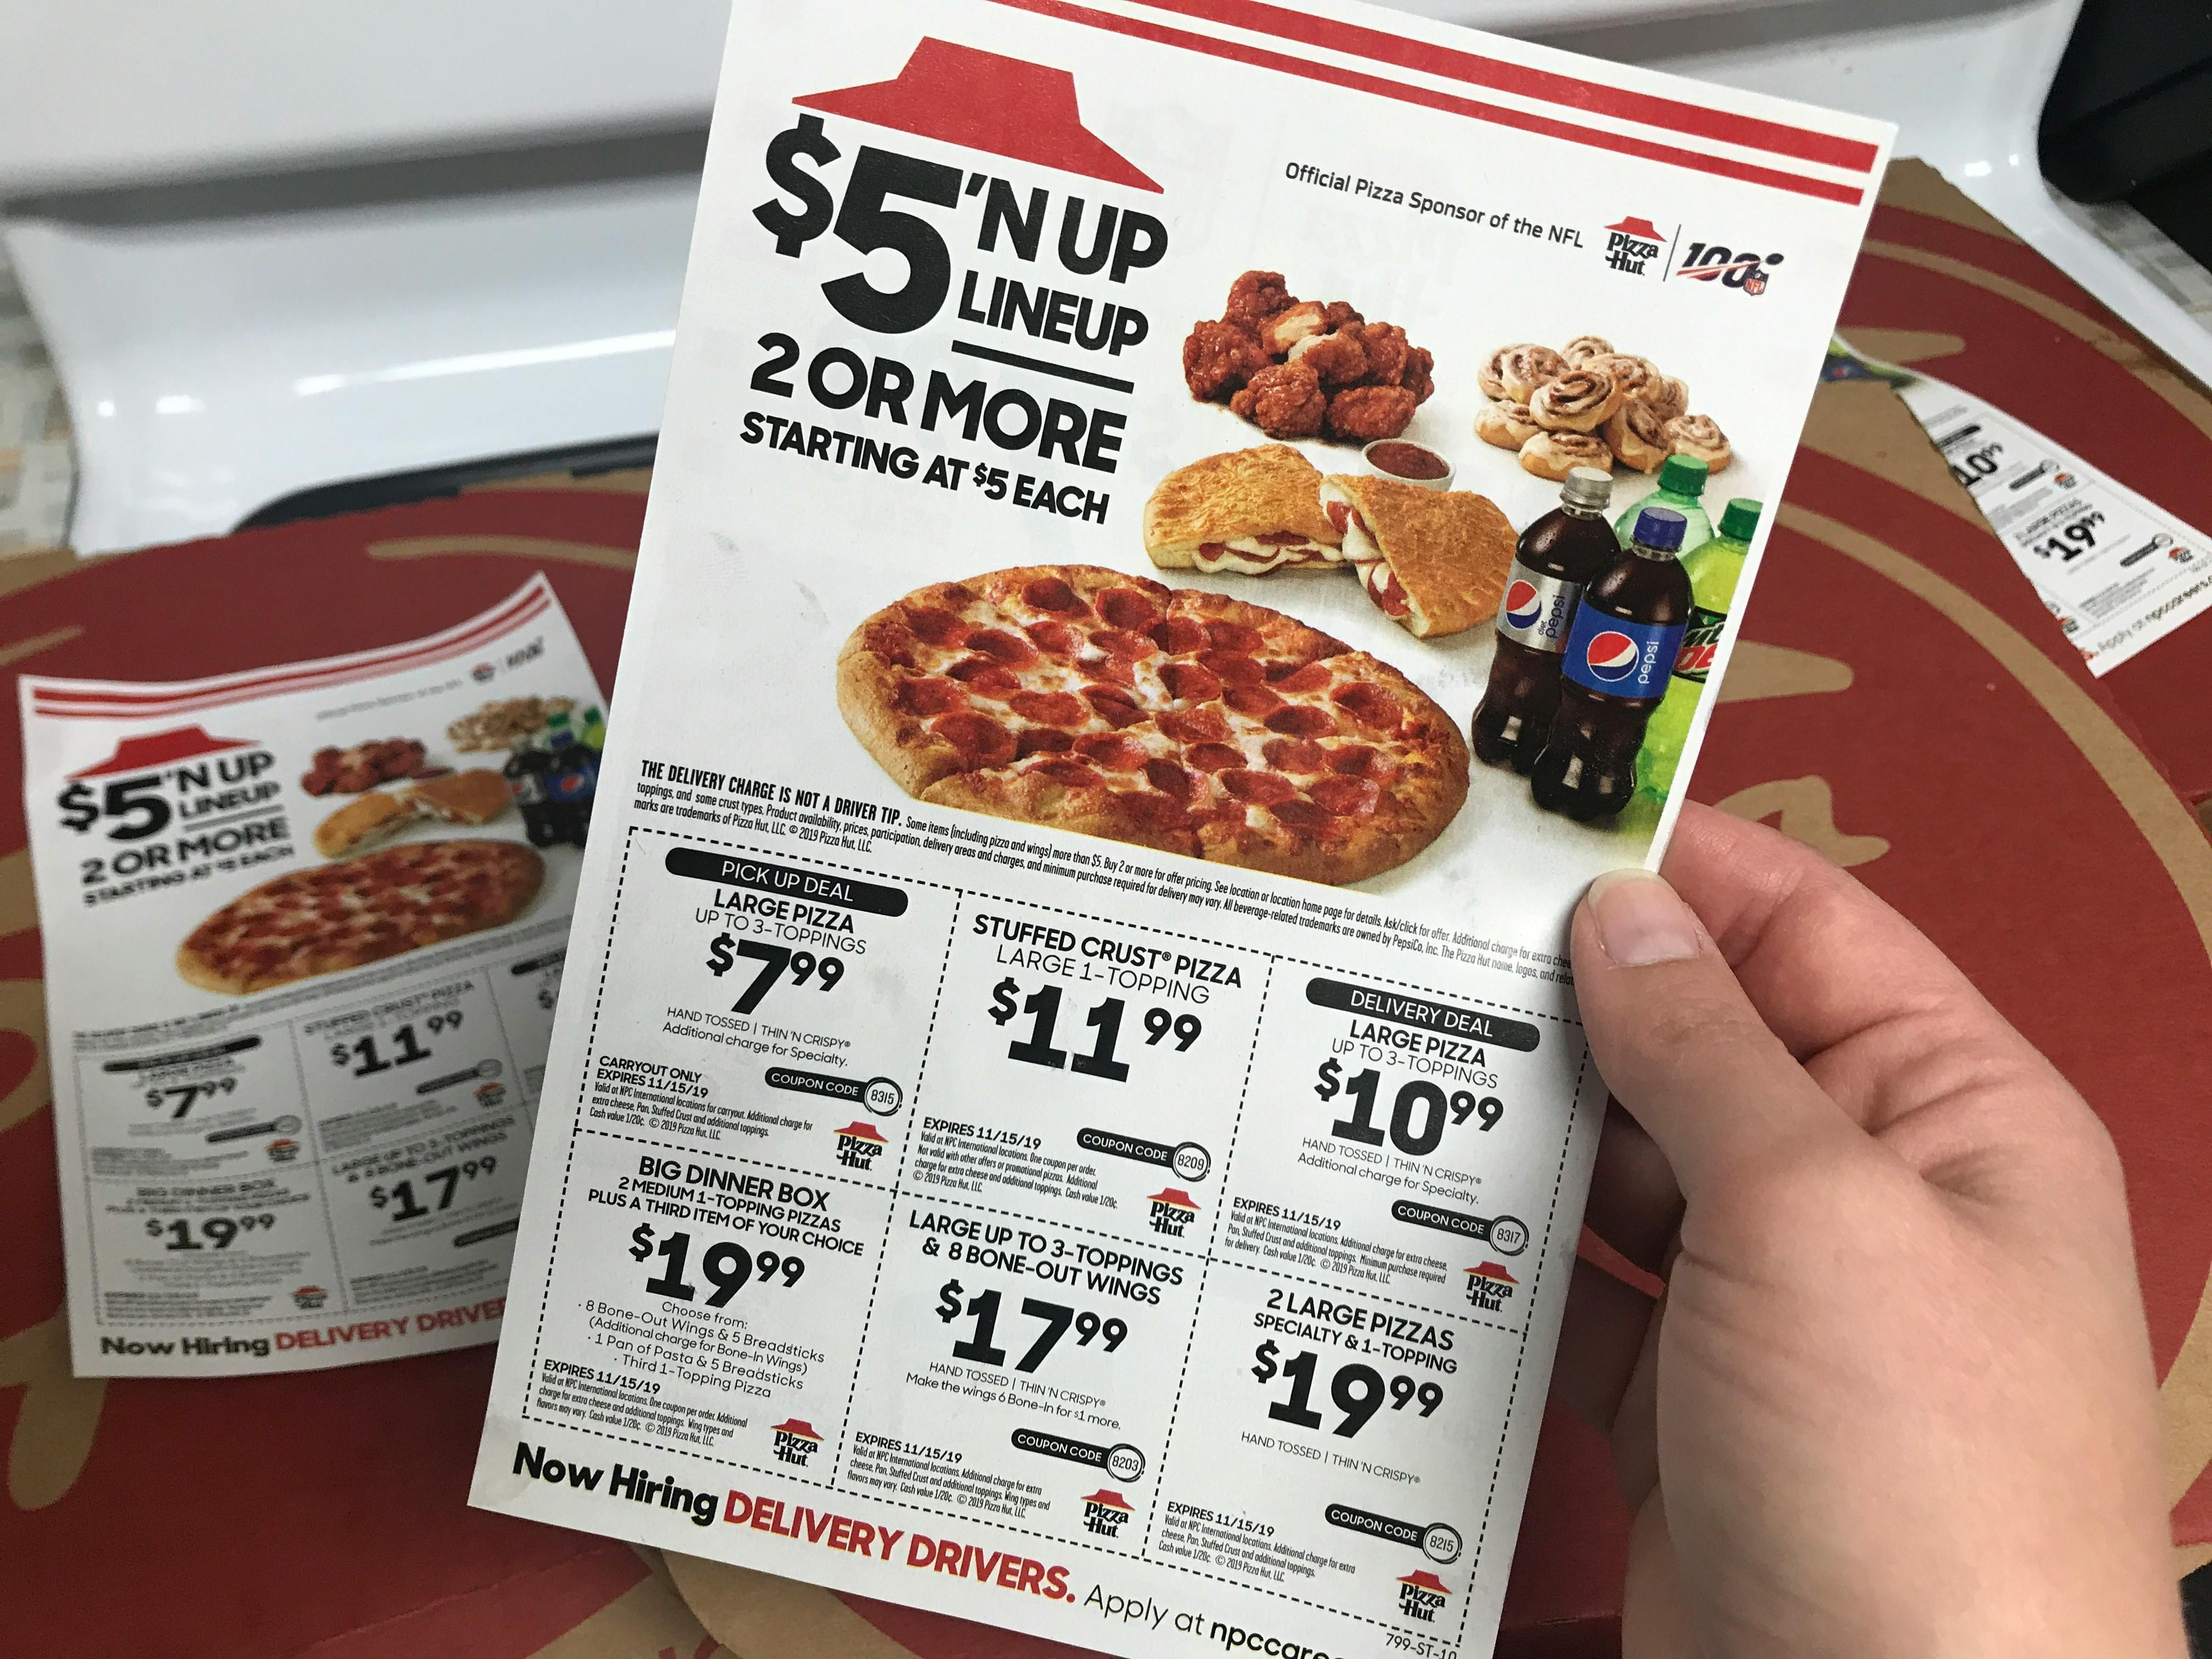 13 Pizza Hut Deals and Savings Tricks You Can't Live Without The